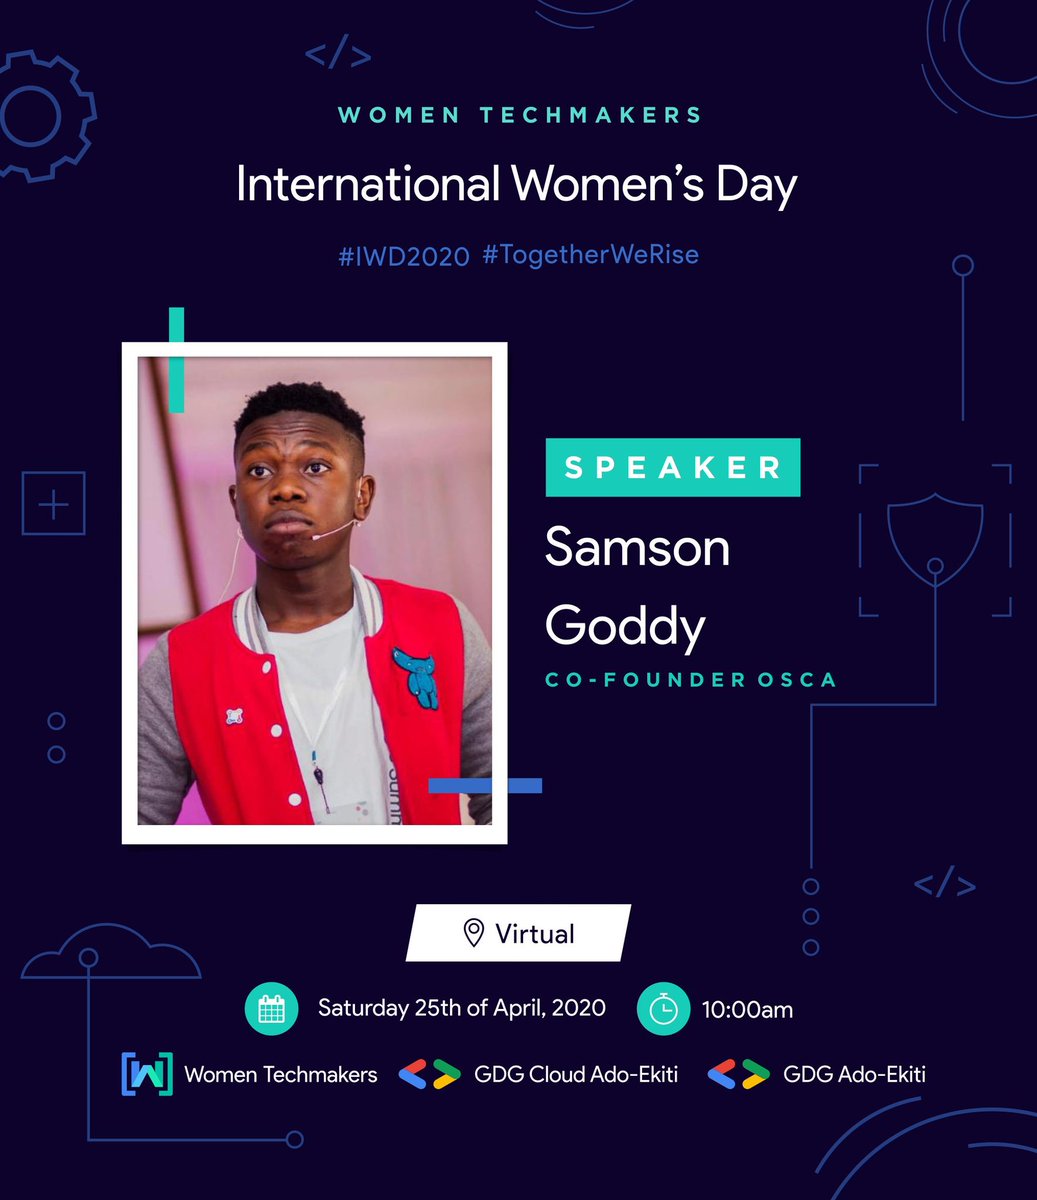 We are super excited to announce that @Samson_Goddy will be speaking on open source at our #IWD20 celebration💃

#TogetherWeRise #IWD20 #WTMAdoEkiti